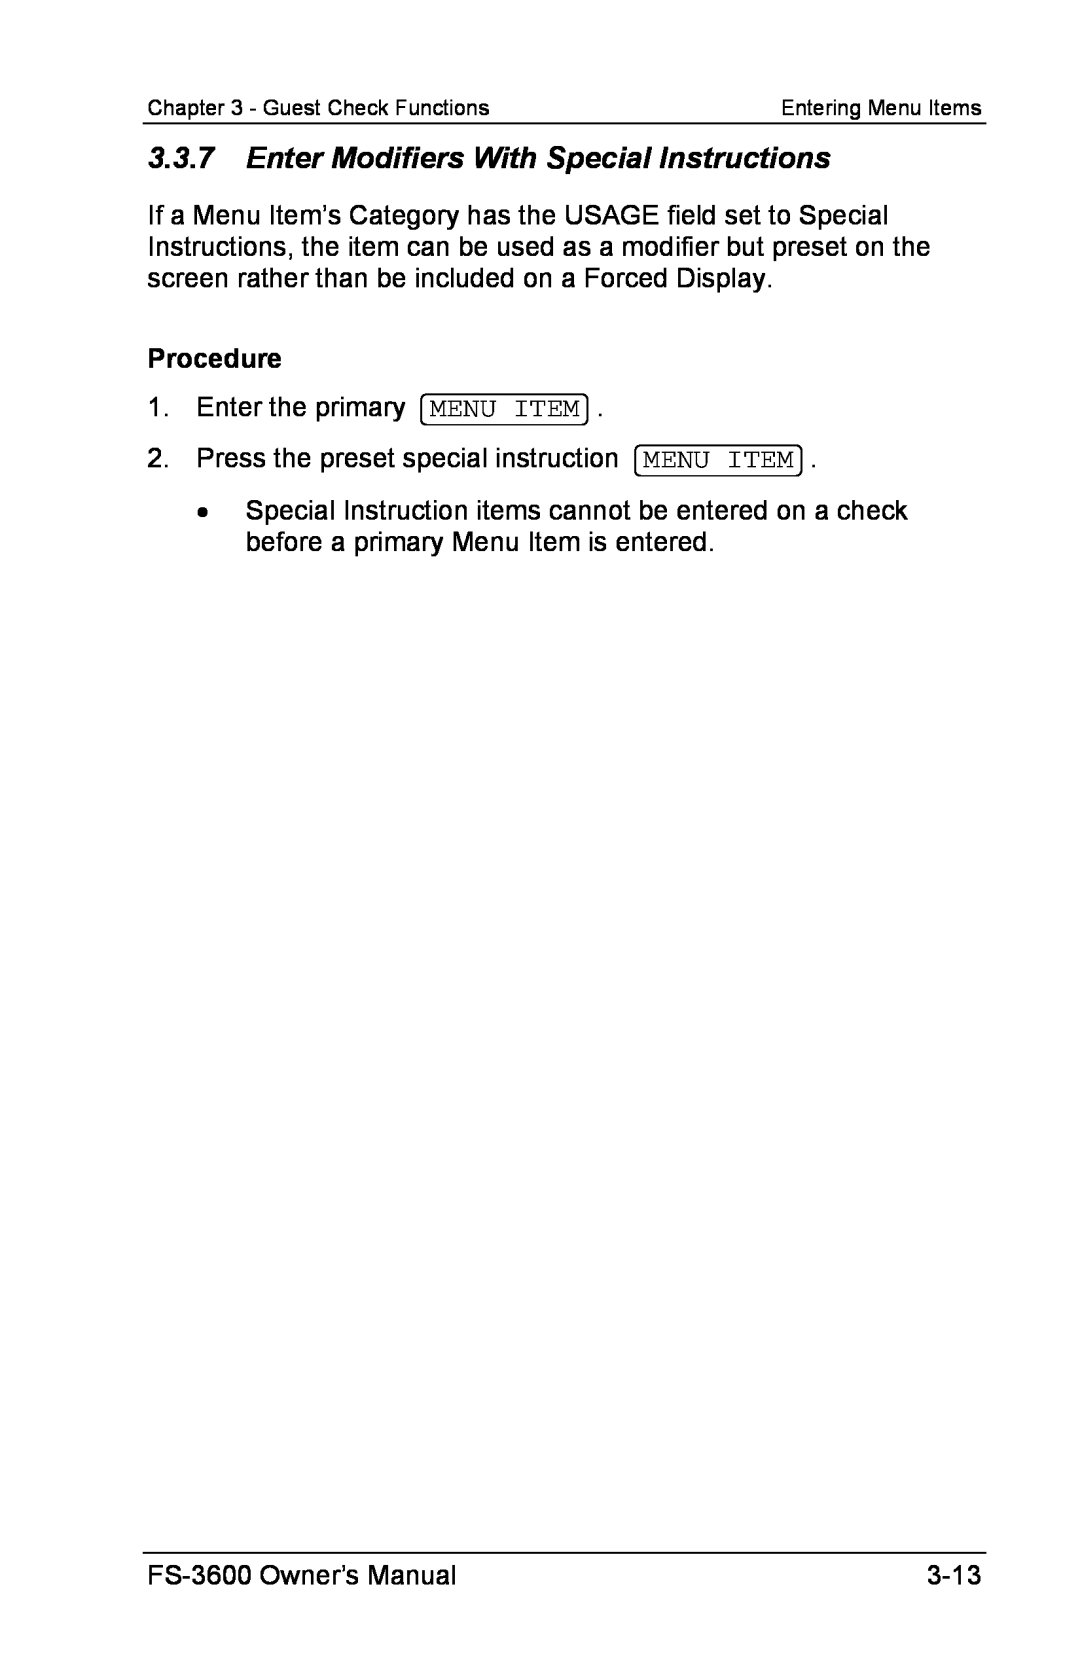 Toshiba FS-3600 owner manual 3.3.7Enter Modifiers With Special Instructions, Procedure 